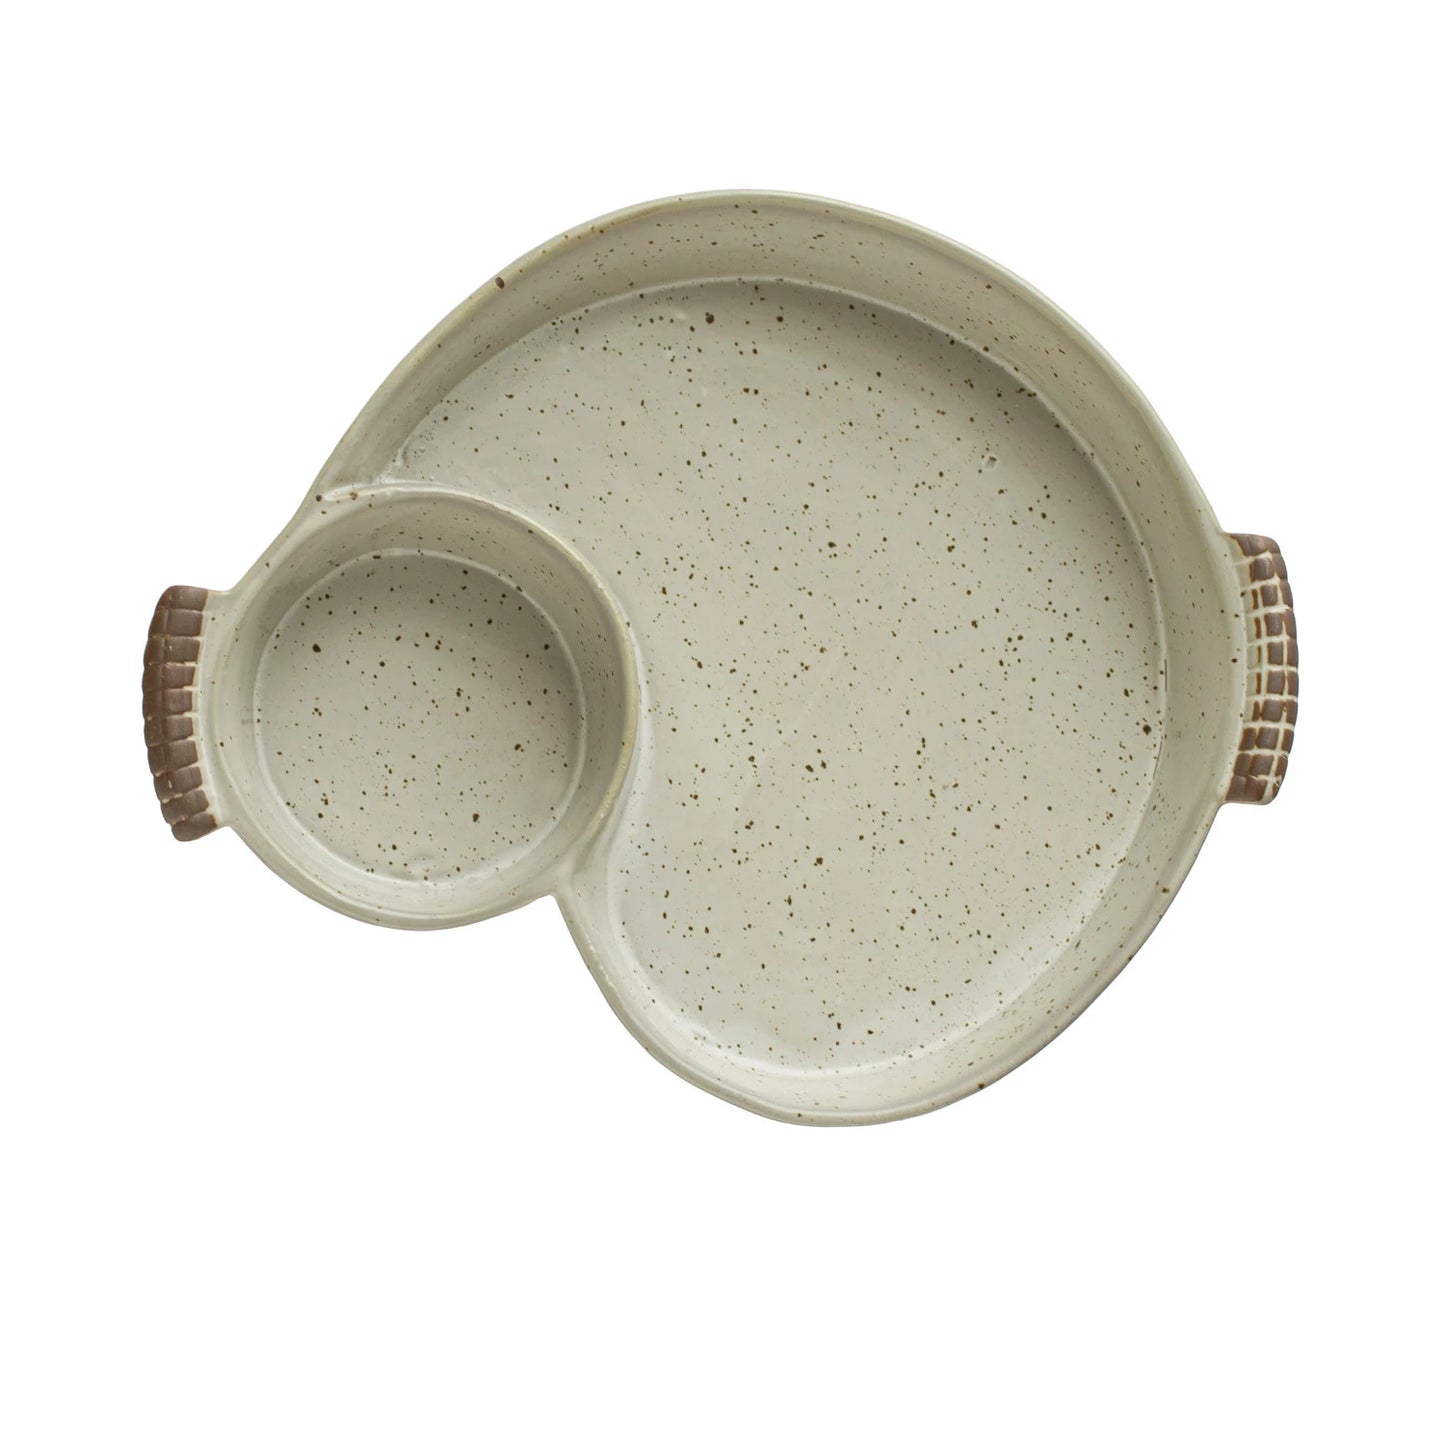 Stoneware Dish w/ 2 Sections & Handles, Reactive Glaze, Cream Color (Each One Will Vary)